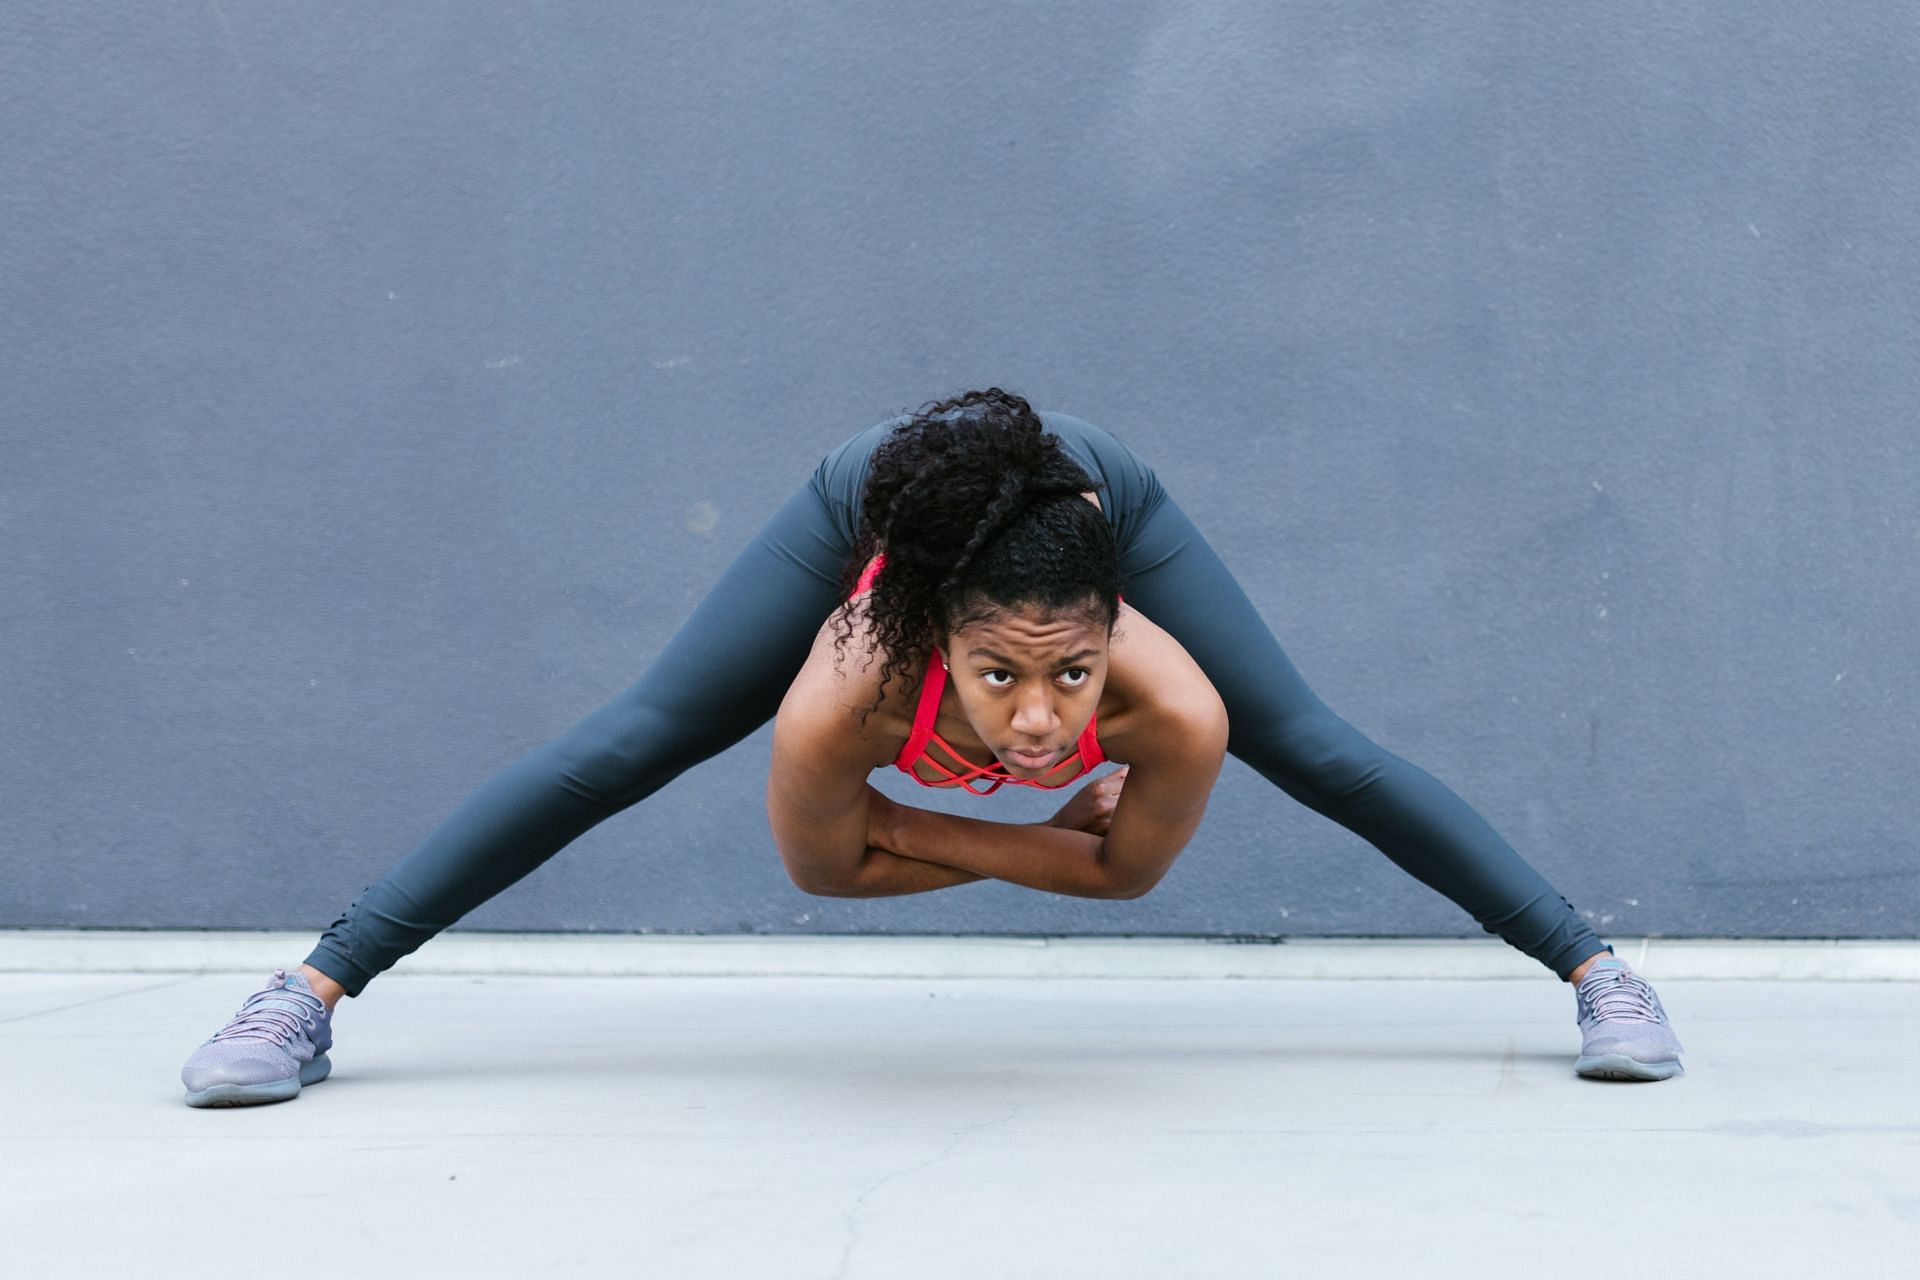 Bodyweight exercises are a simple and effective way to stay fit (Image via Pexels @Rodnae Productions)